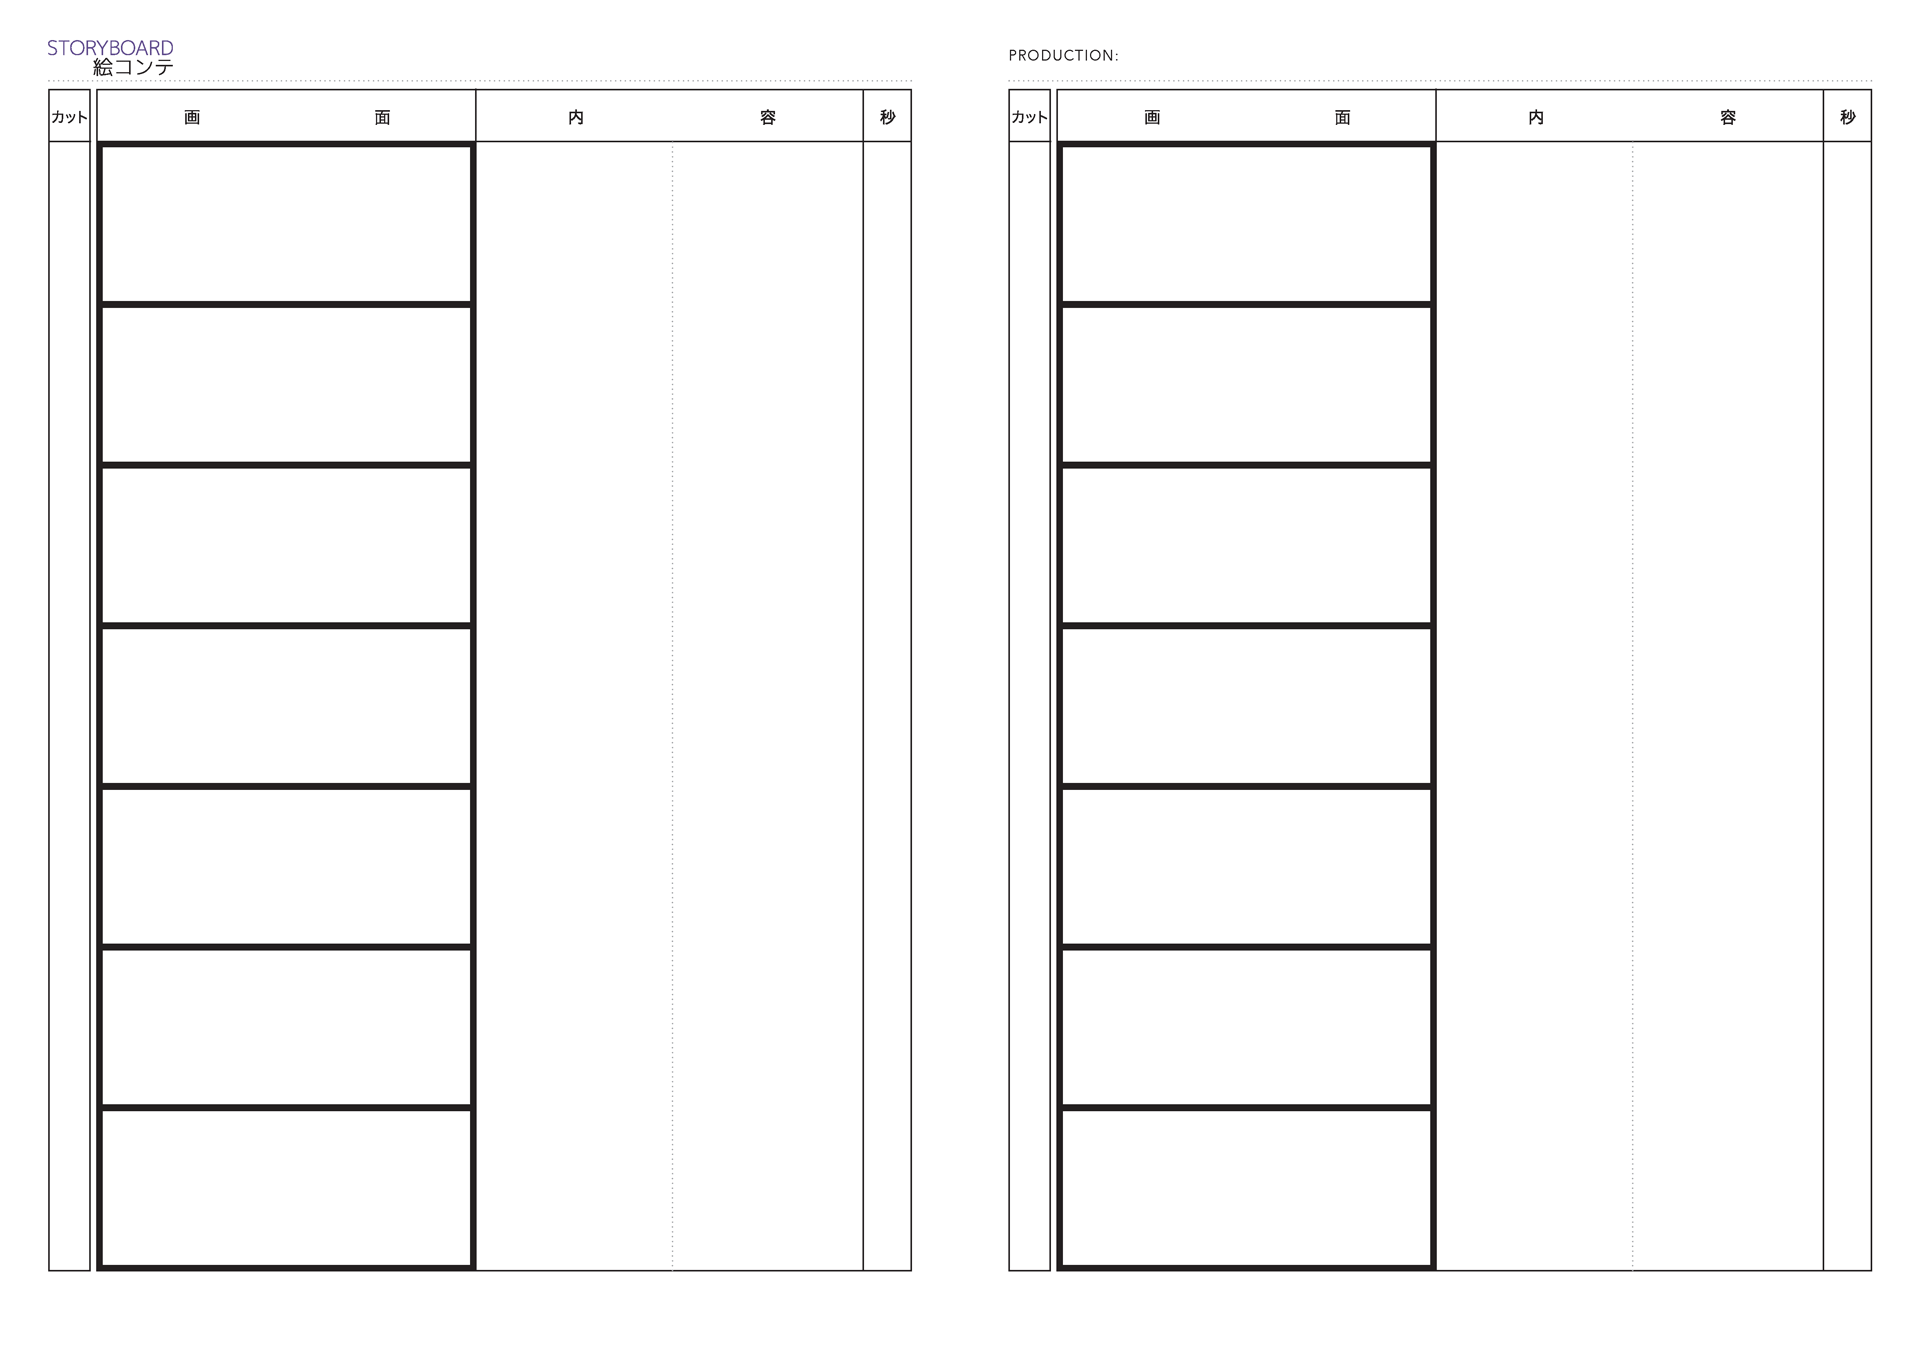 free-anime-storyboard-templates-for-2-39-1-films-in-japanese